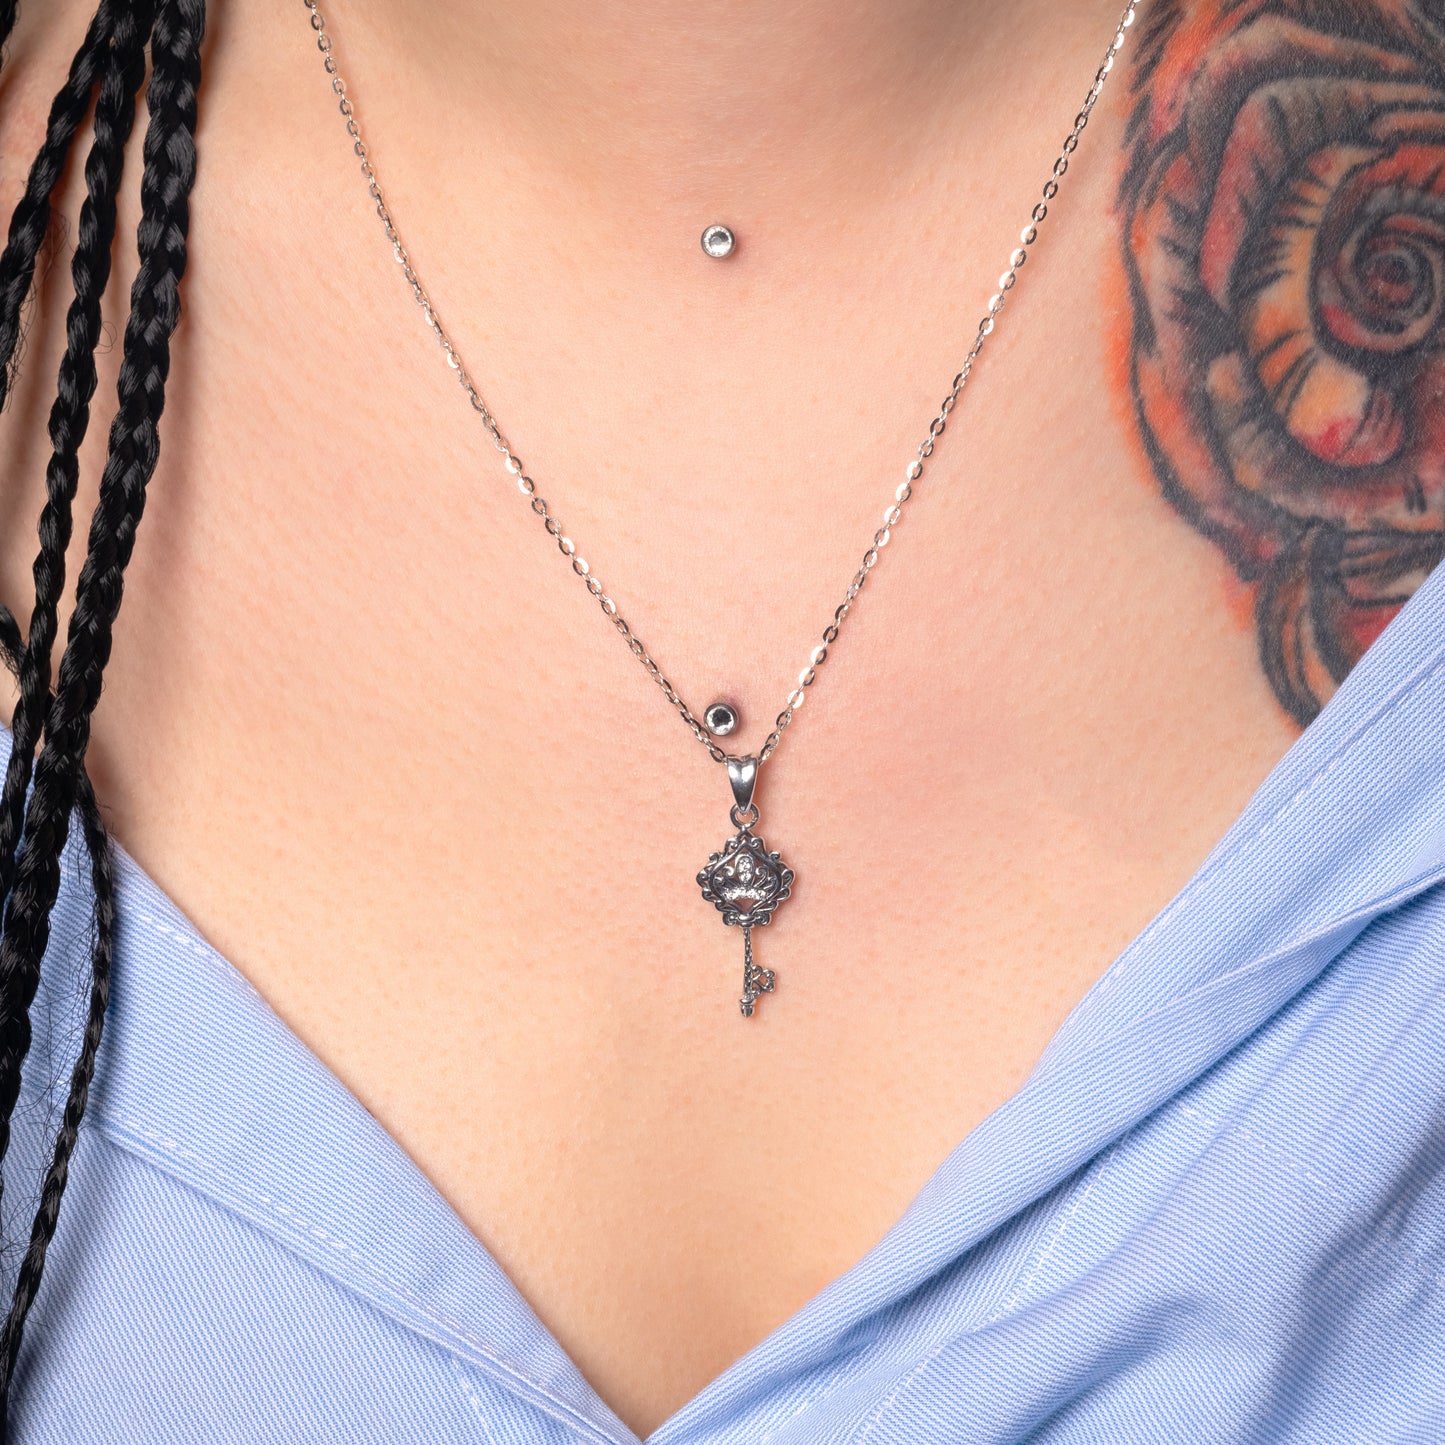 Model wearing Key Crystal Silver Pendant with Flat Cable necklace. Zoomed-in view.